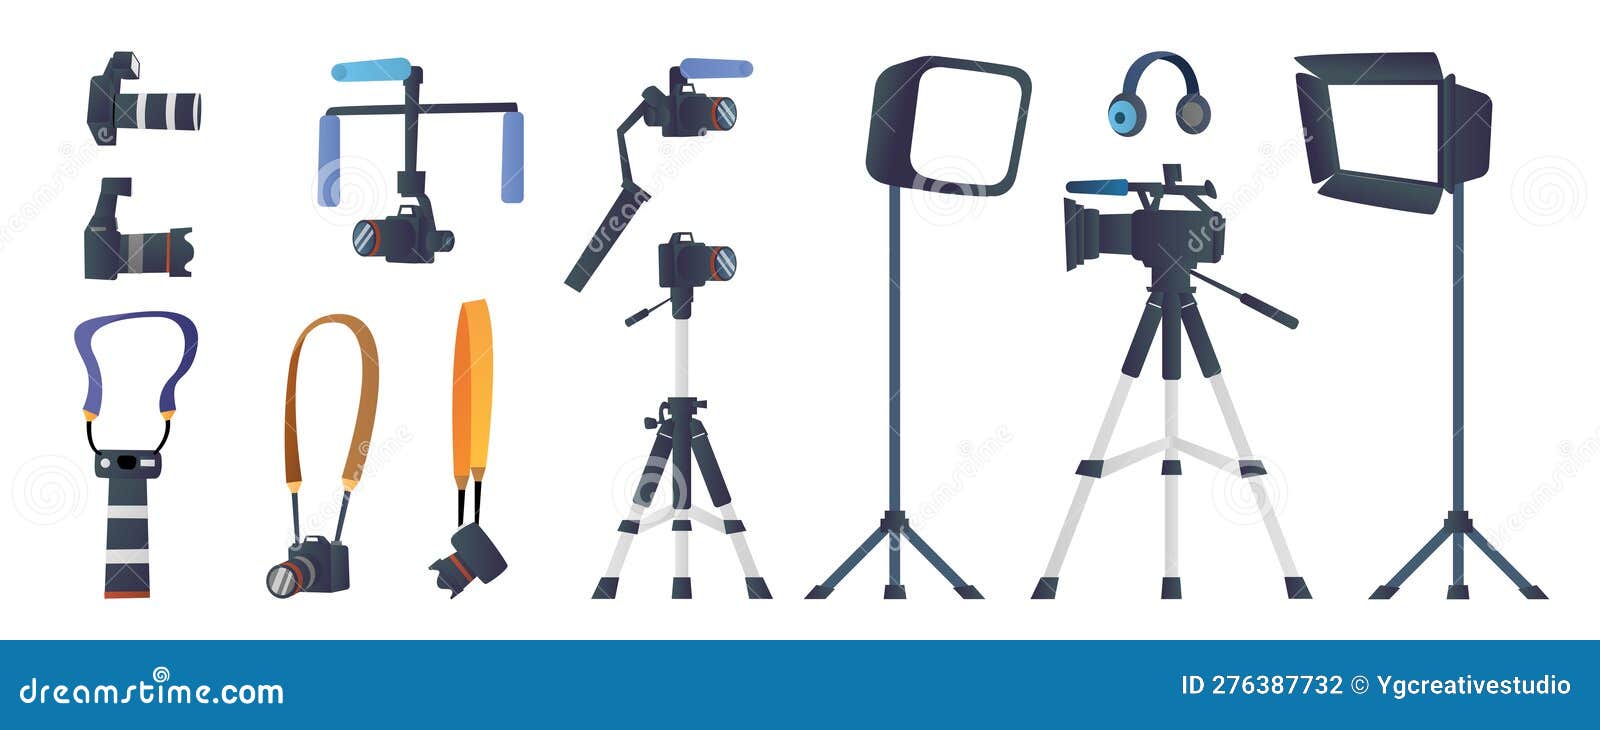 Photography and Videography Equipment Collection Set Stock Vector ...